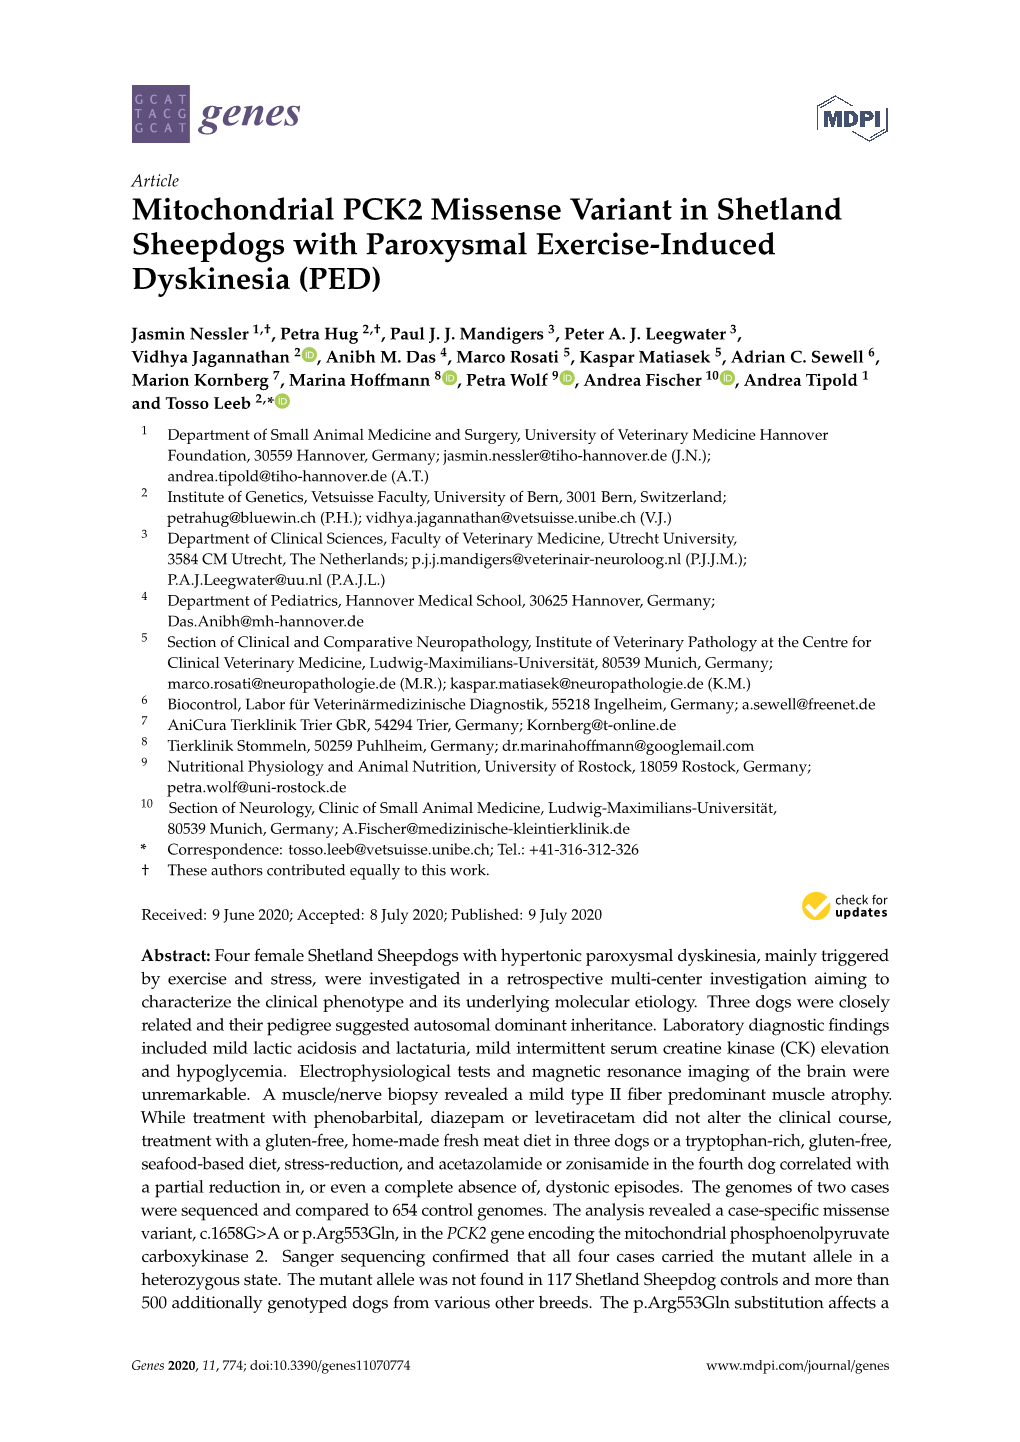 Mitochondrial PCK2 Missense Variant in Shetland Sheepdogs with Paroxysmal Exercise-Induced Dyskinesia (PED)